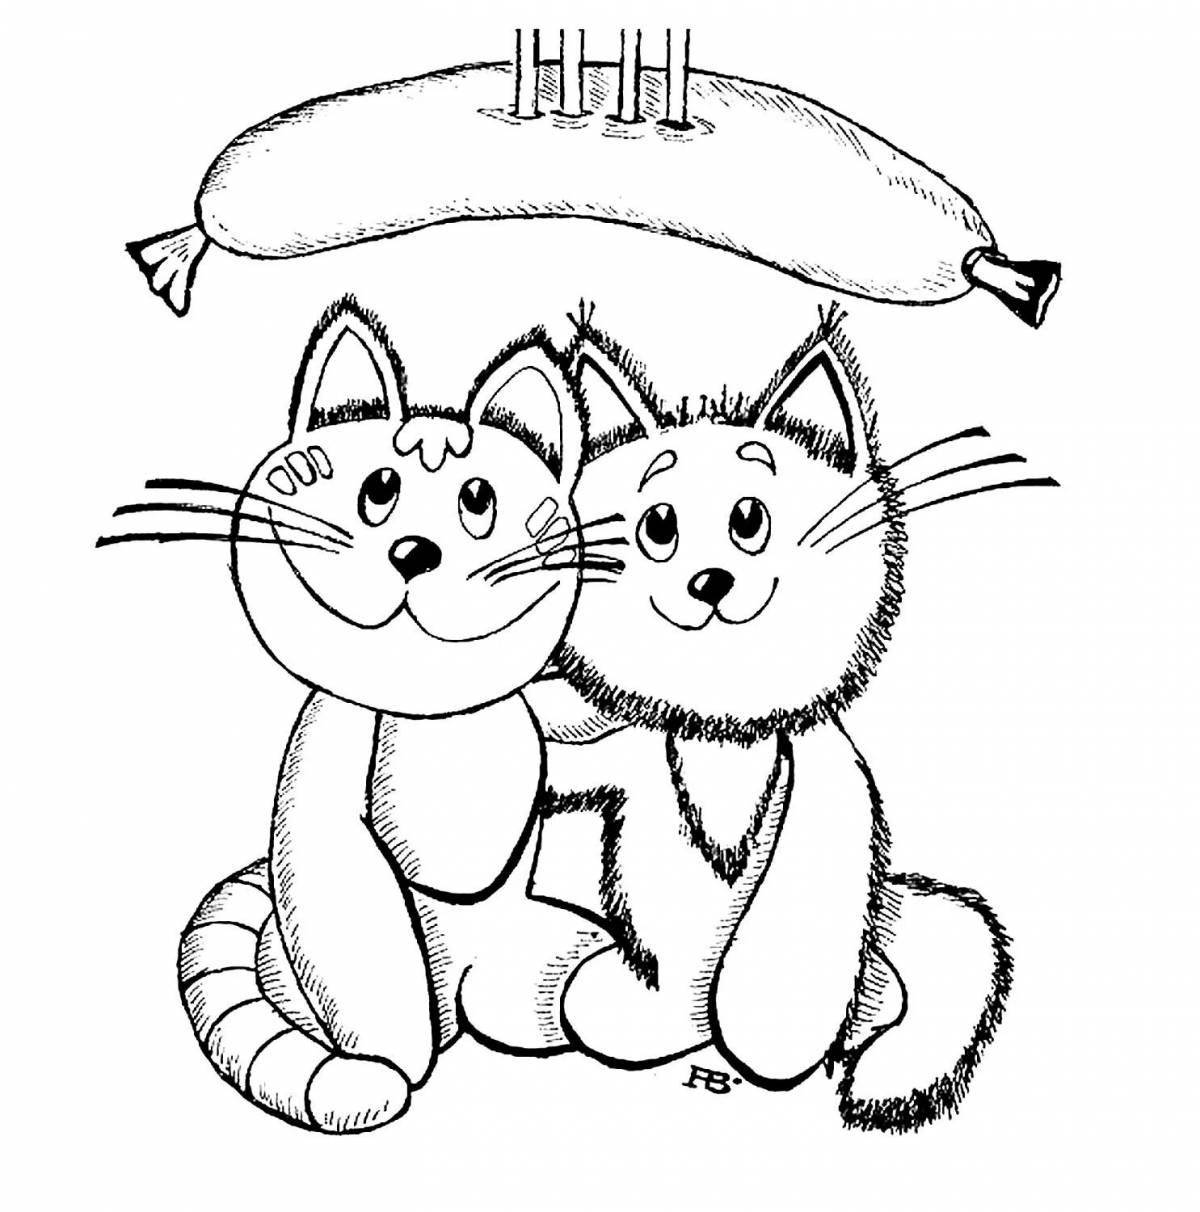 Glitter cat sausage coloring page